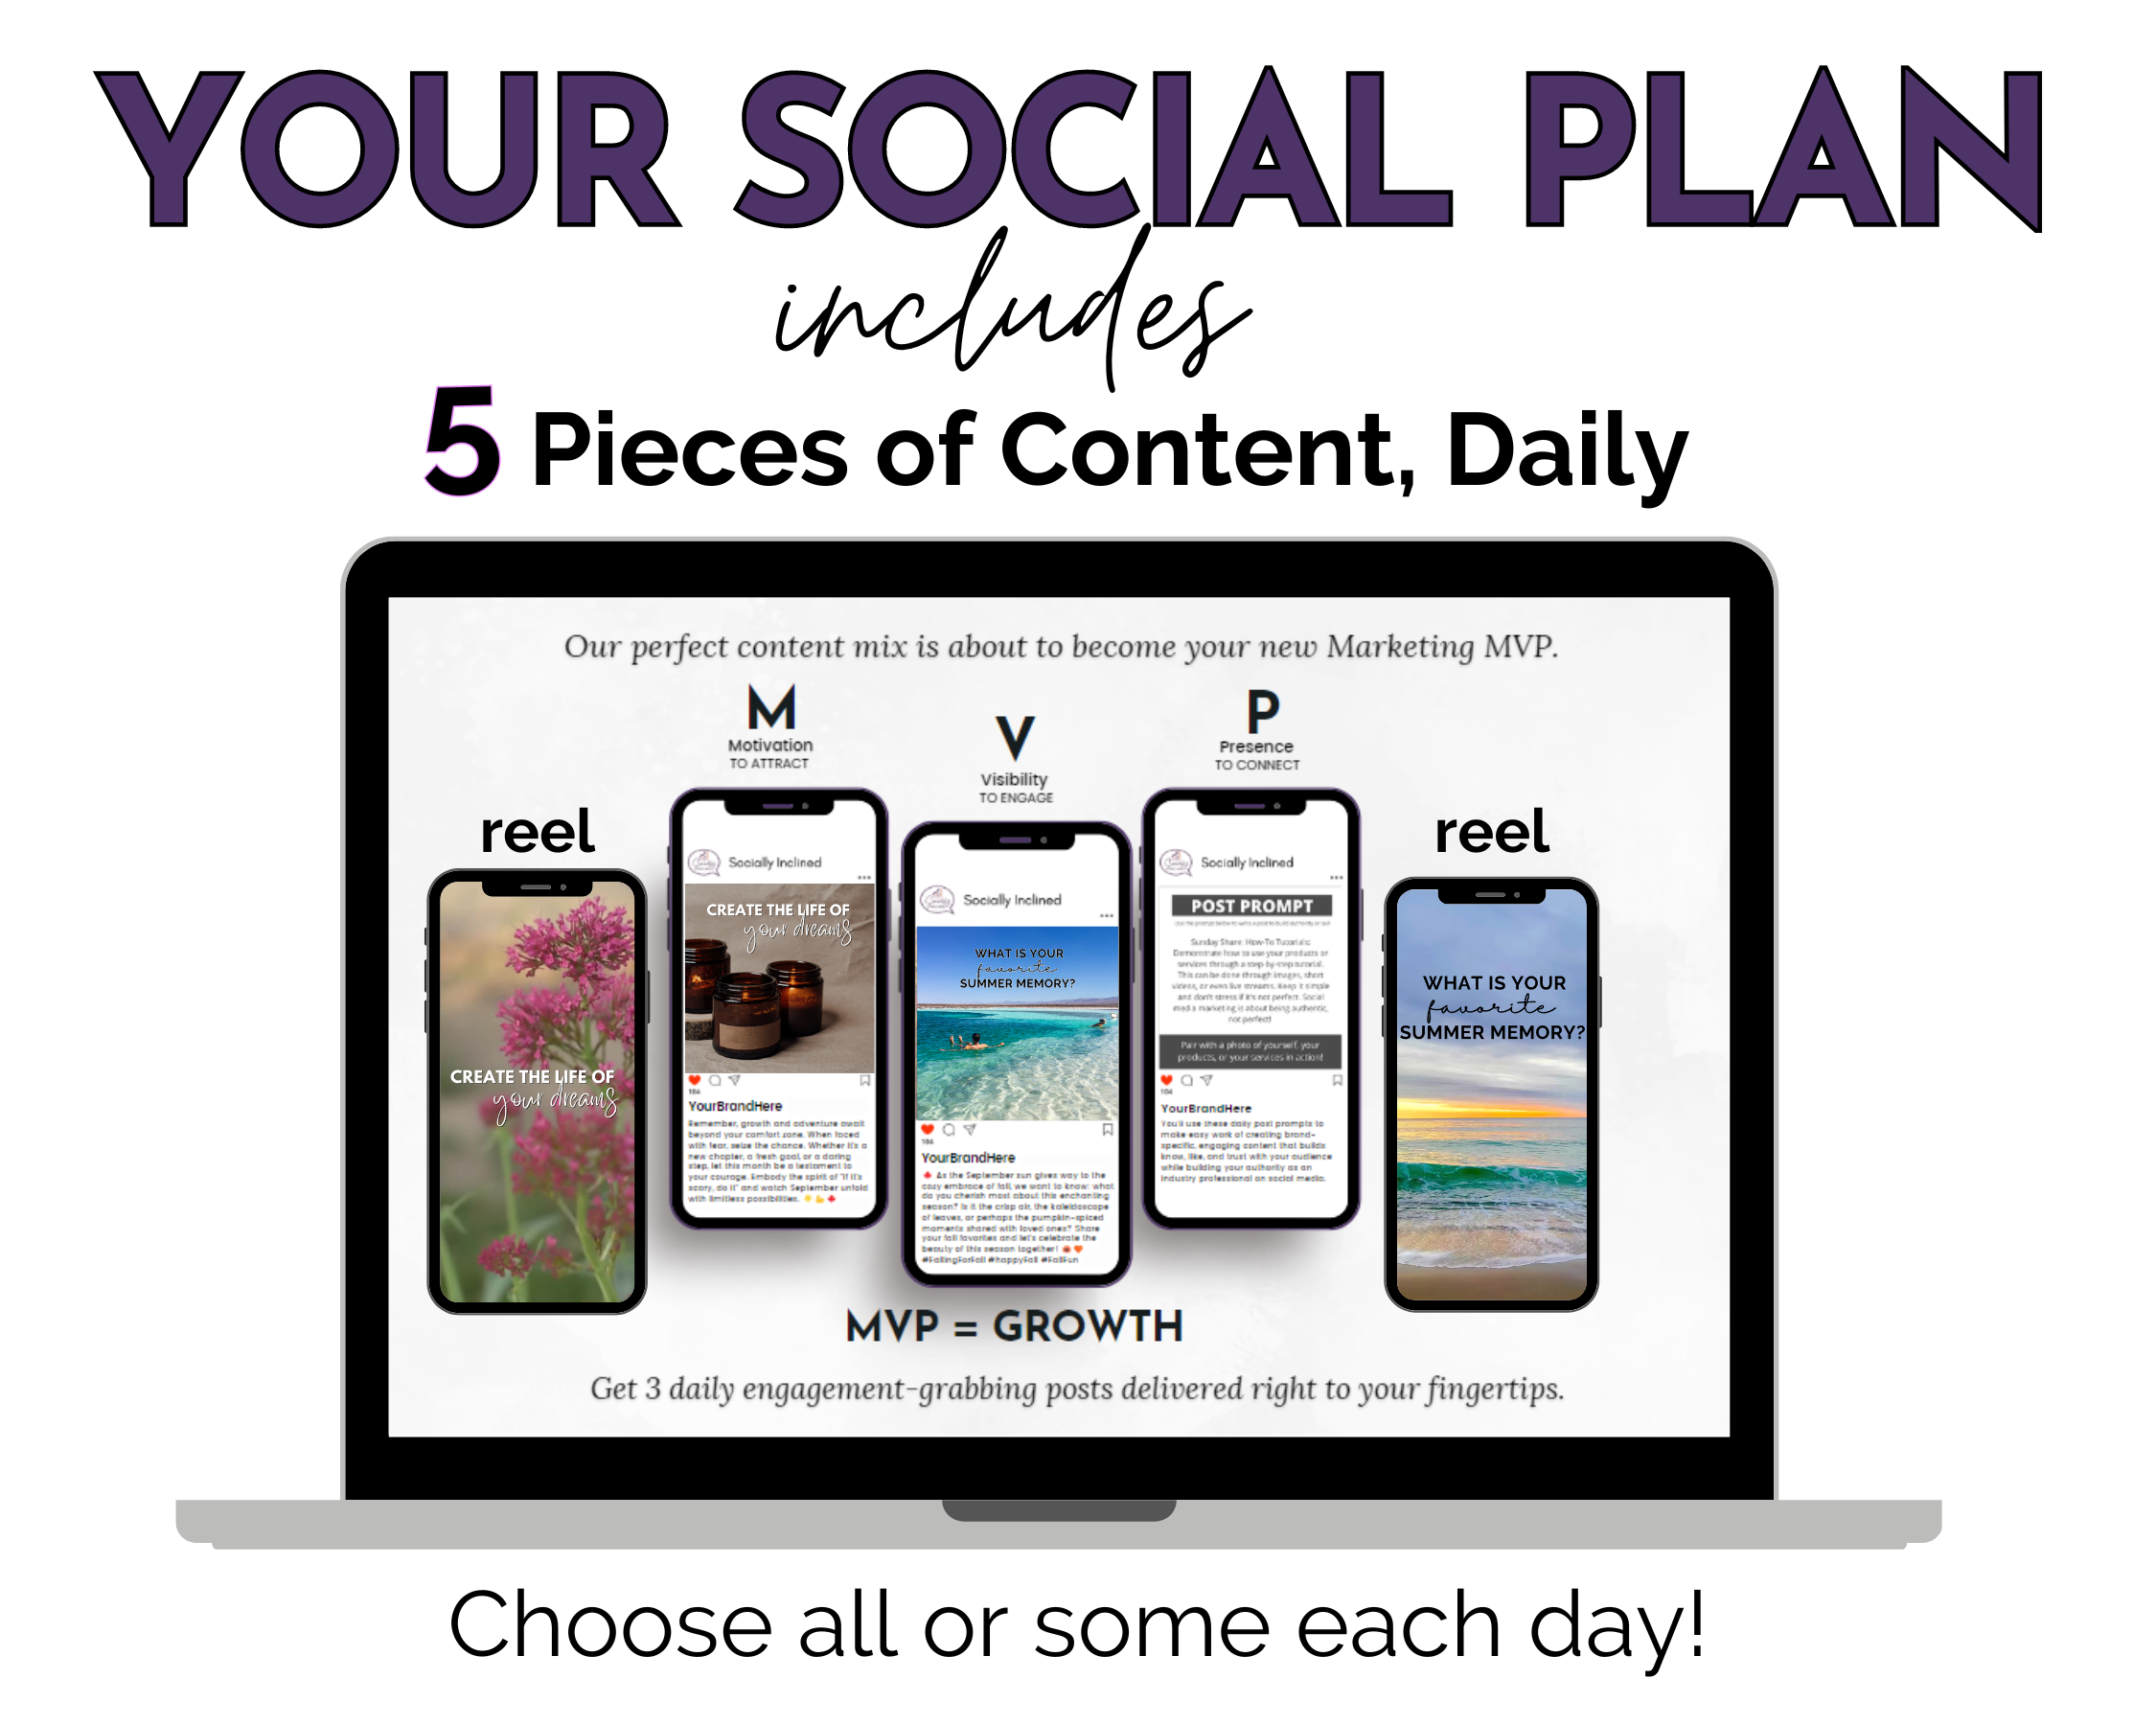 A laptop display shows five different social media post previews under the heading "YOUR SOCIAL PLAN includes 5 Pieces of Content, Daily." The tagline reads, "Choose all or some each day to boost growing your business online with your Your Social Plan Content Membership from Get Socially Inclined!